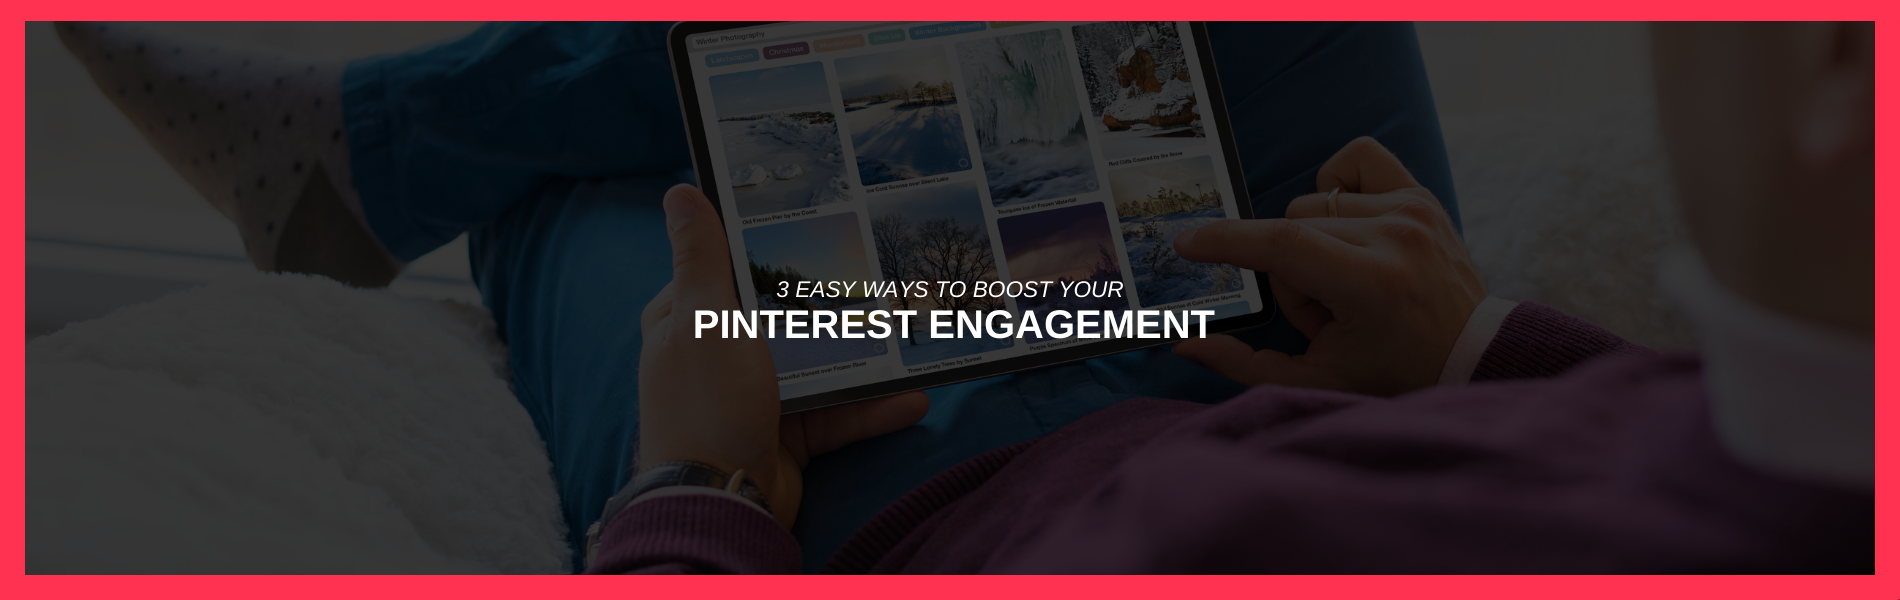 3 Easy Ways to Boost Your Pinterest Engagement